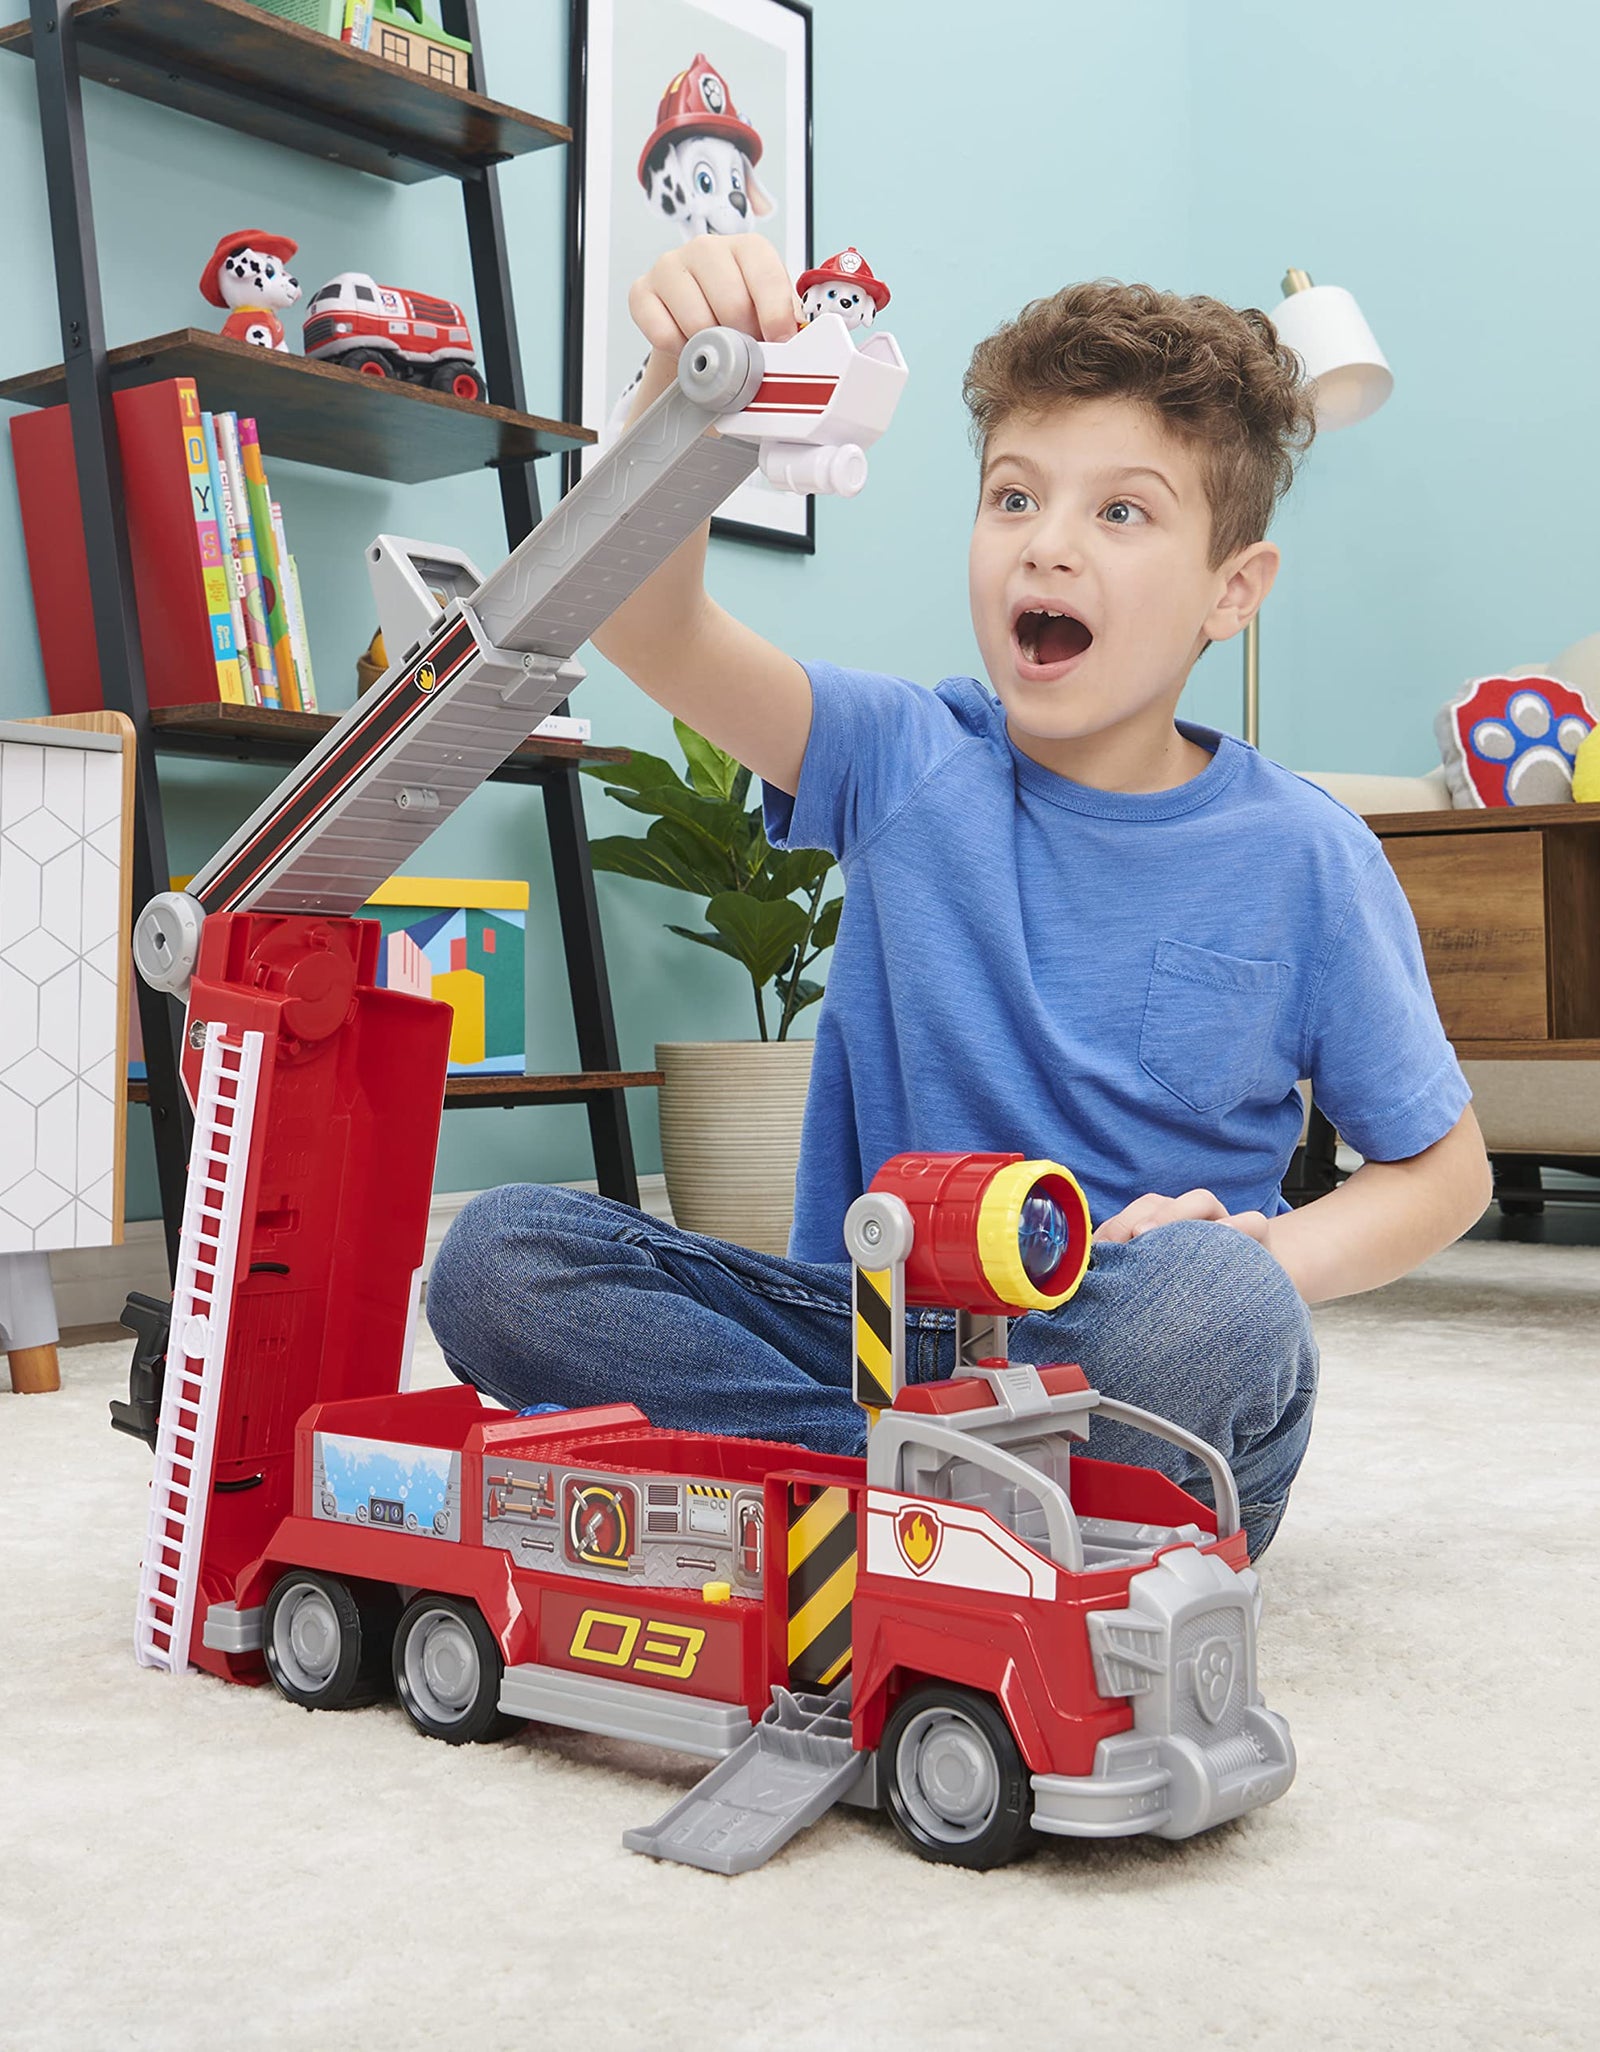 PAW Patrol, Marshall’s Transforming Movie City Fire Truck with Extending Ladder, Lights, Sounds and Action Figure, Kids Toys for Ages 3 and up